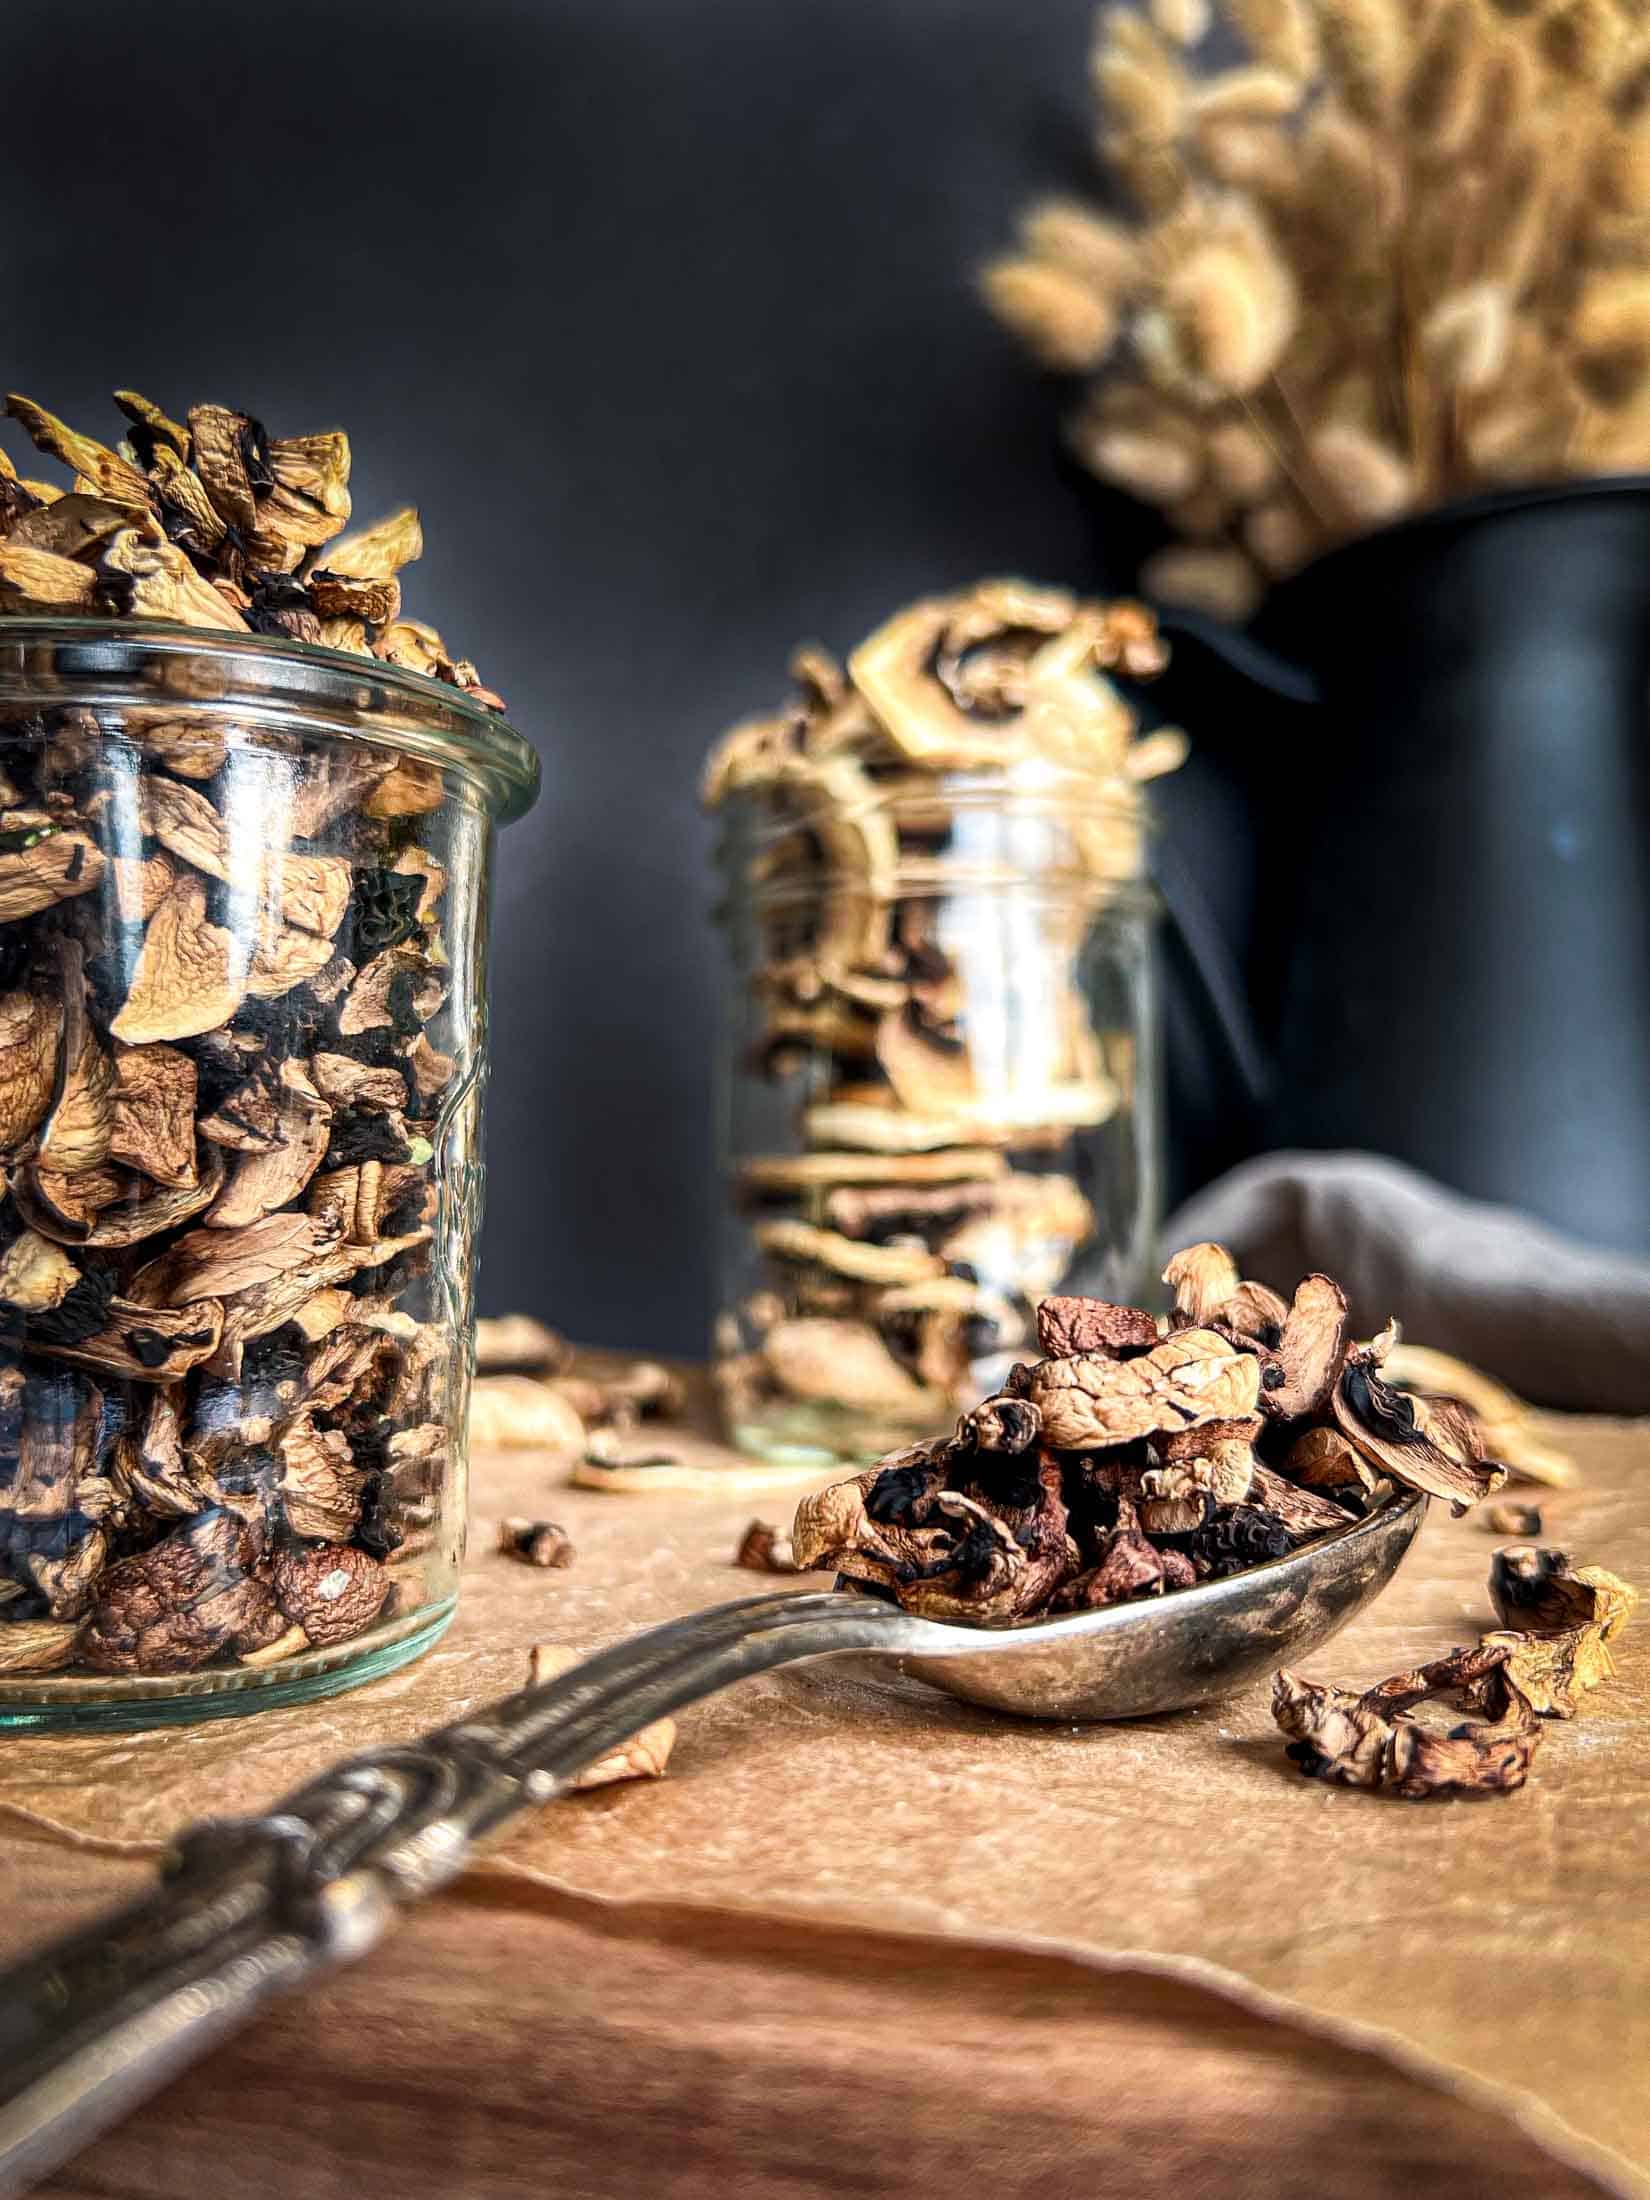 A closeup view of dehydrated mushroom pieces on a silver 1 tablespoon measuring spoon with jarred dried mushrooms in the foreground.